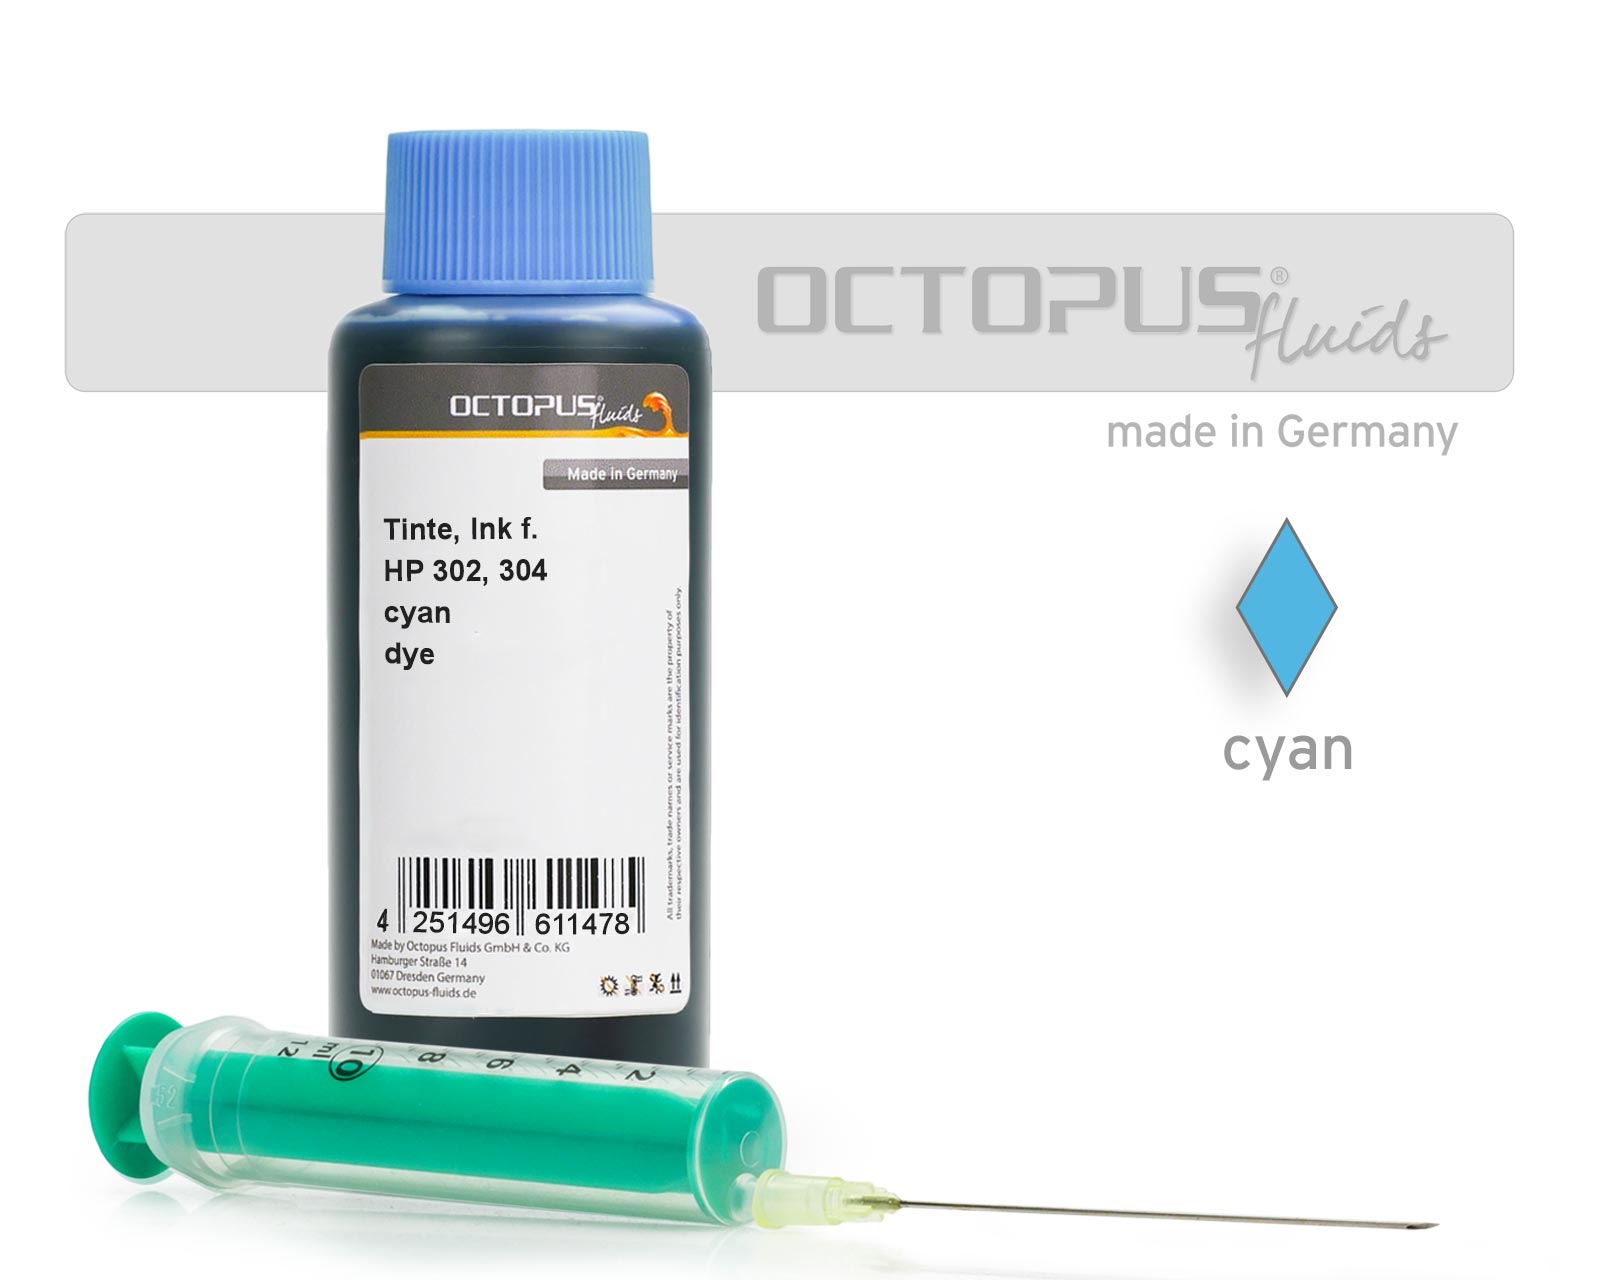 100ml Refill Ink for HP 302, HP 304 cyan with Syringe and gloves